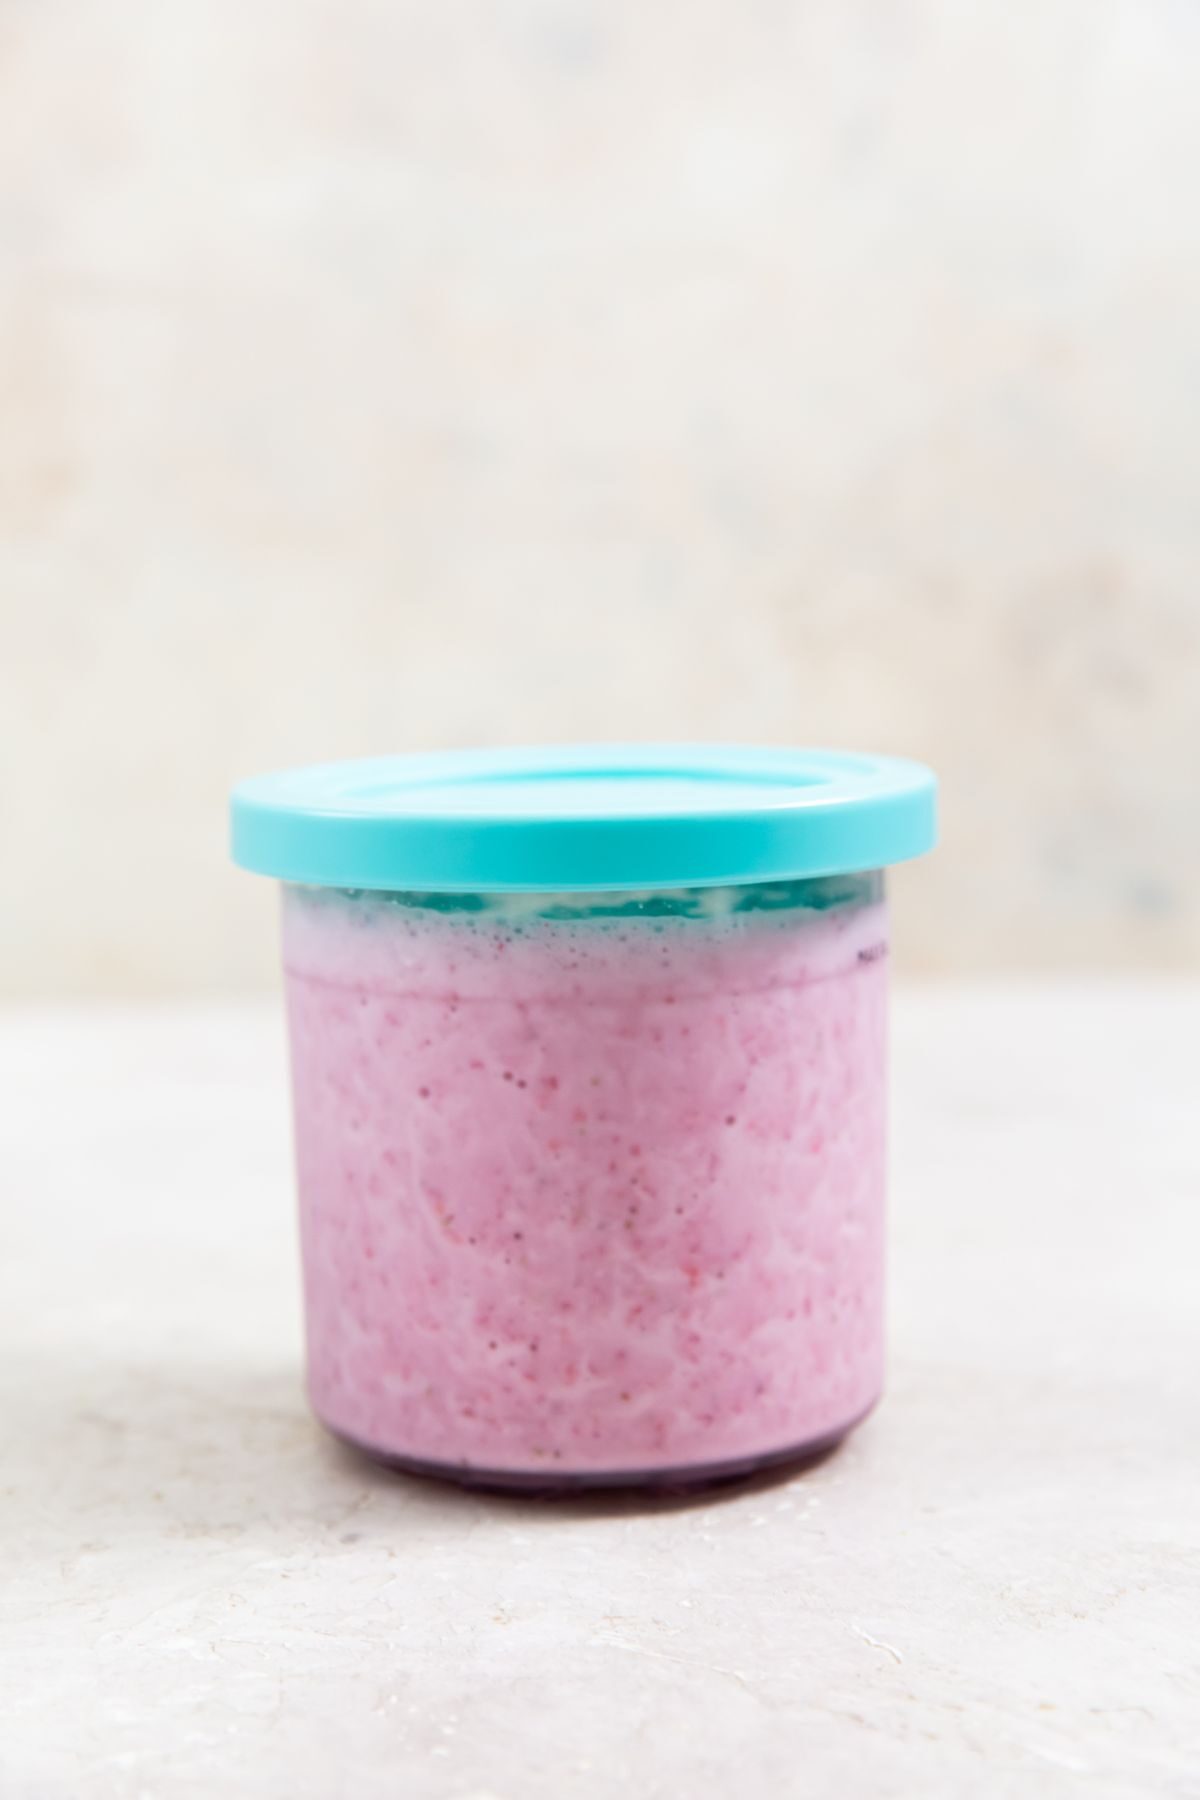 keto strawberry ice cream base in a pint container